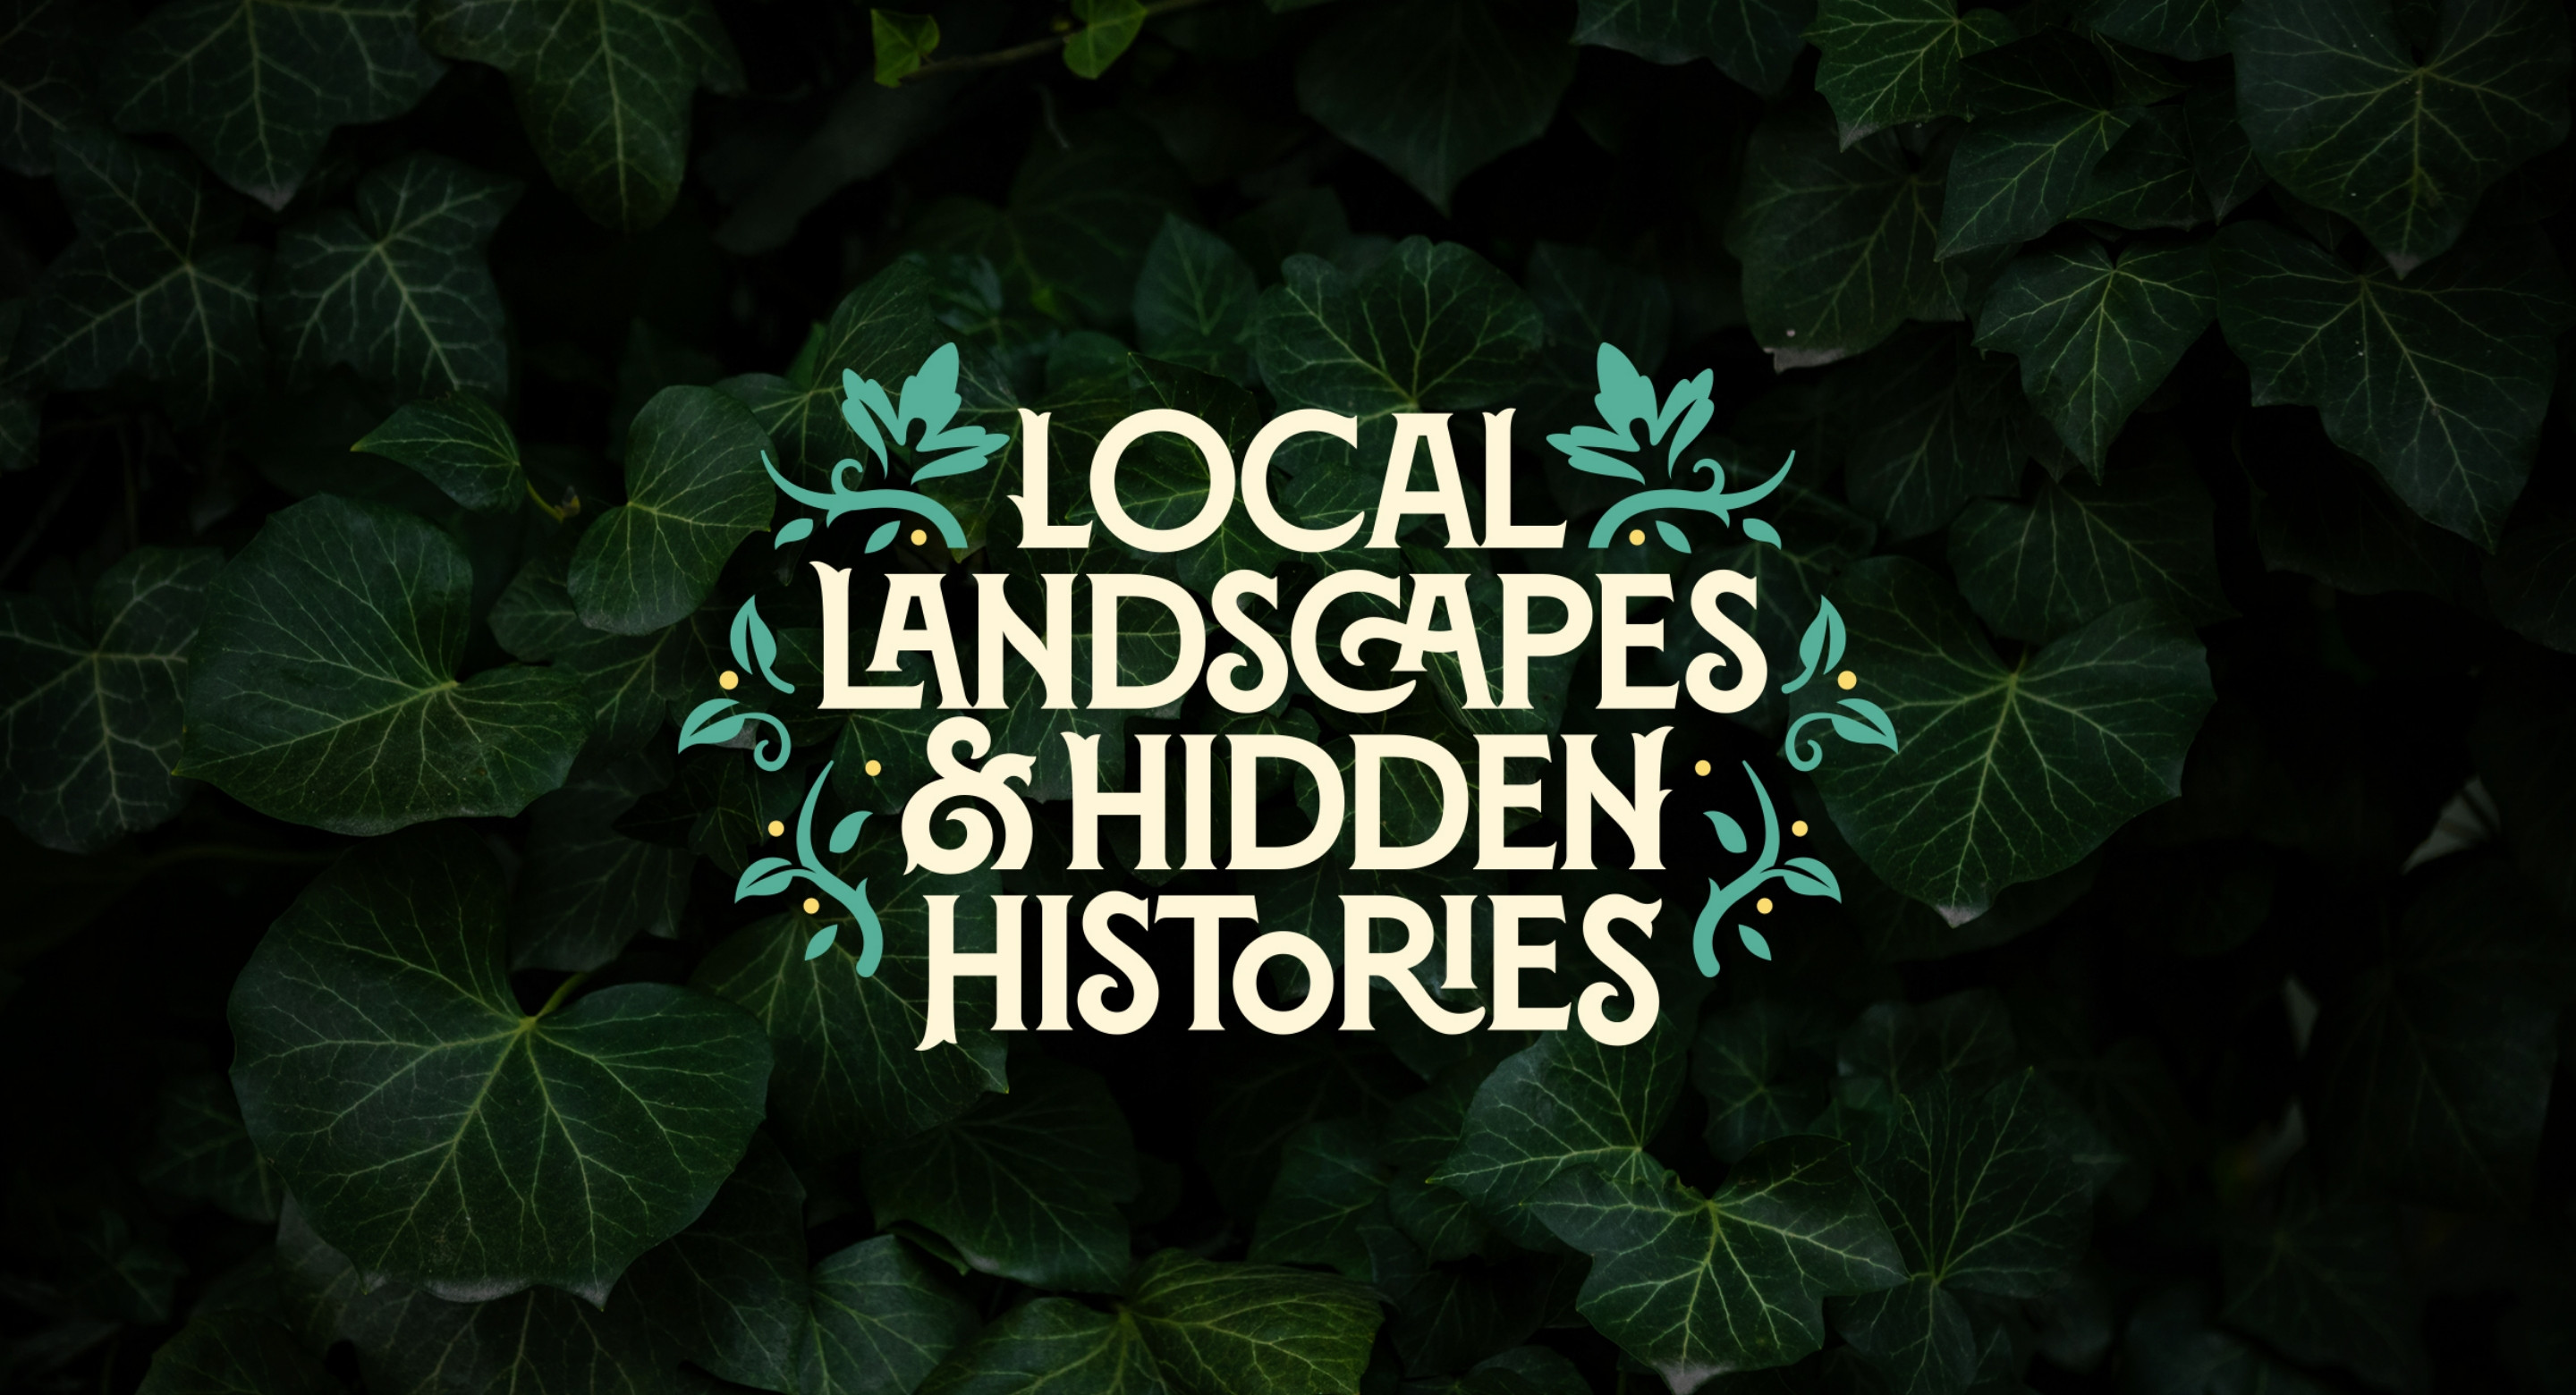 Local Landscapes Hidden Histories logo design community heritage project by Root Studio